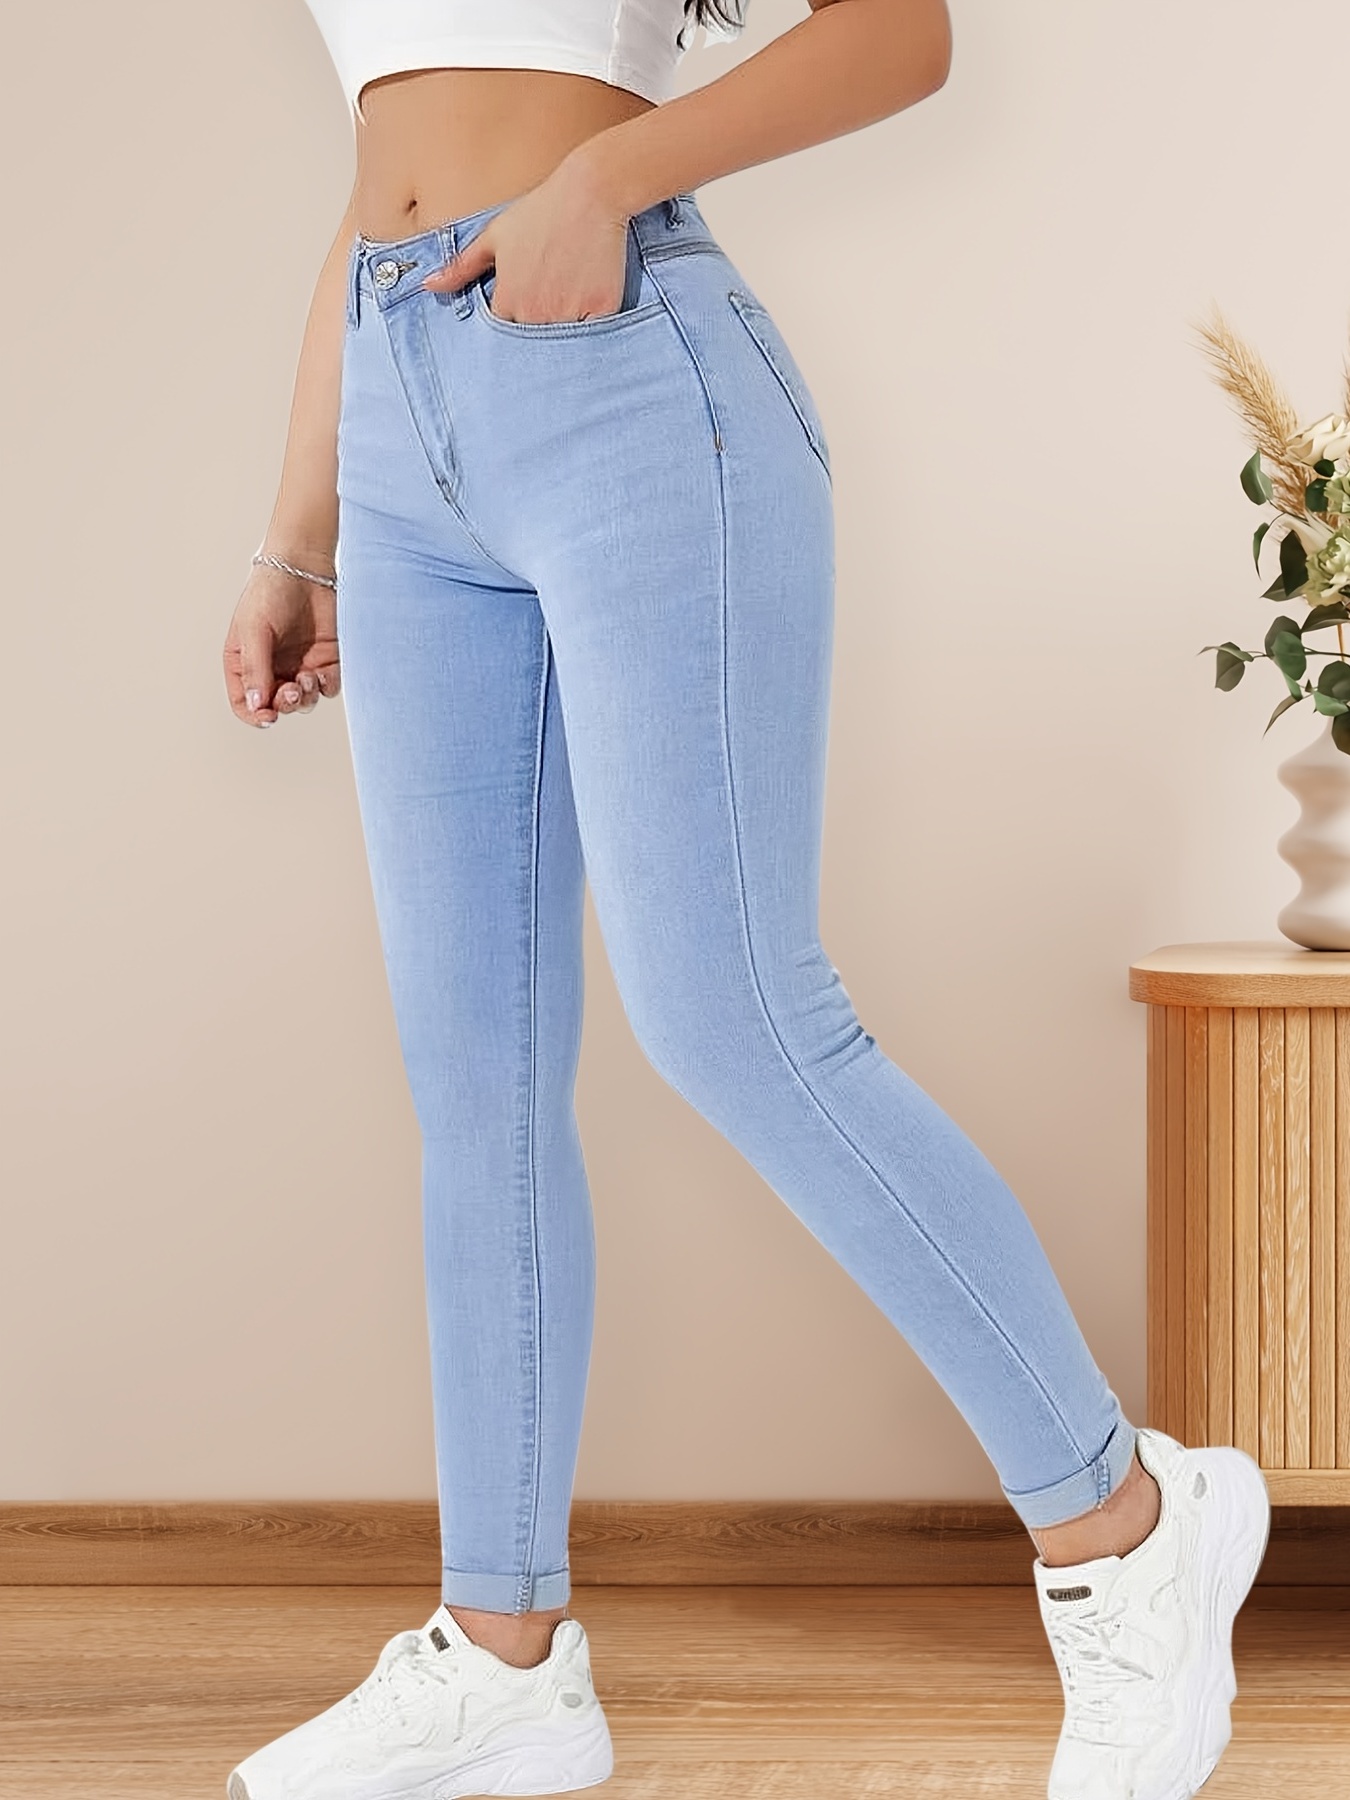 DeFacto Super Skinny High Waisted Jeans for Women – Denim Skinny Jeans for  Women for Casual Wearing(MID Blue,34) at  Women's Jeans store